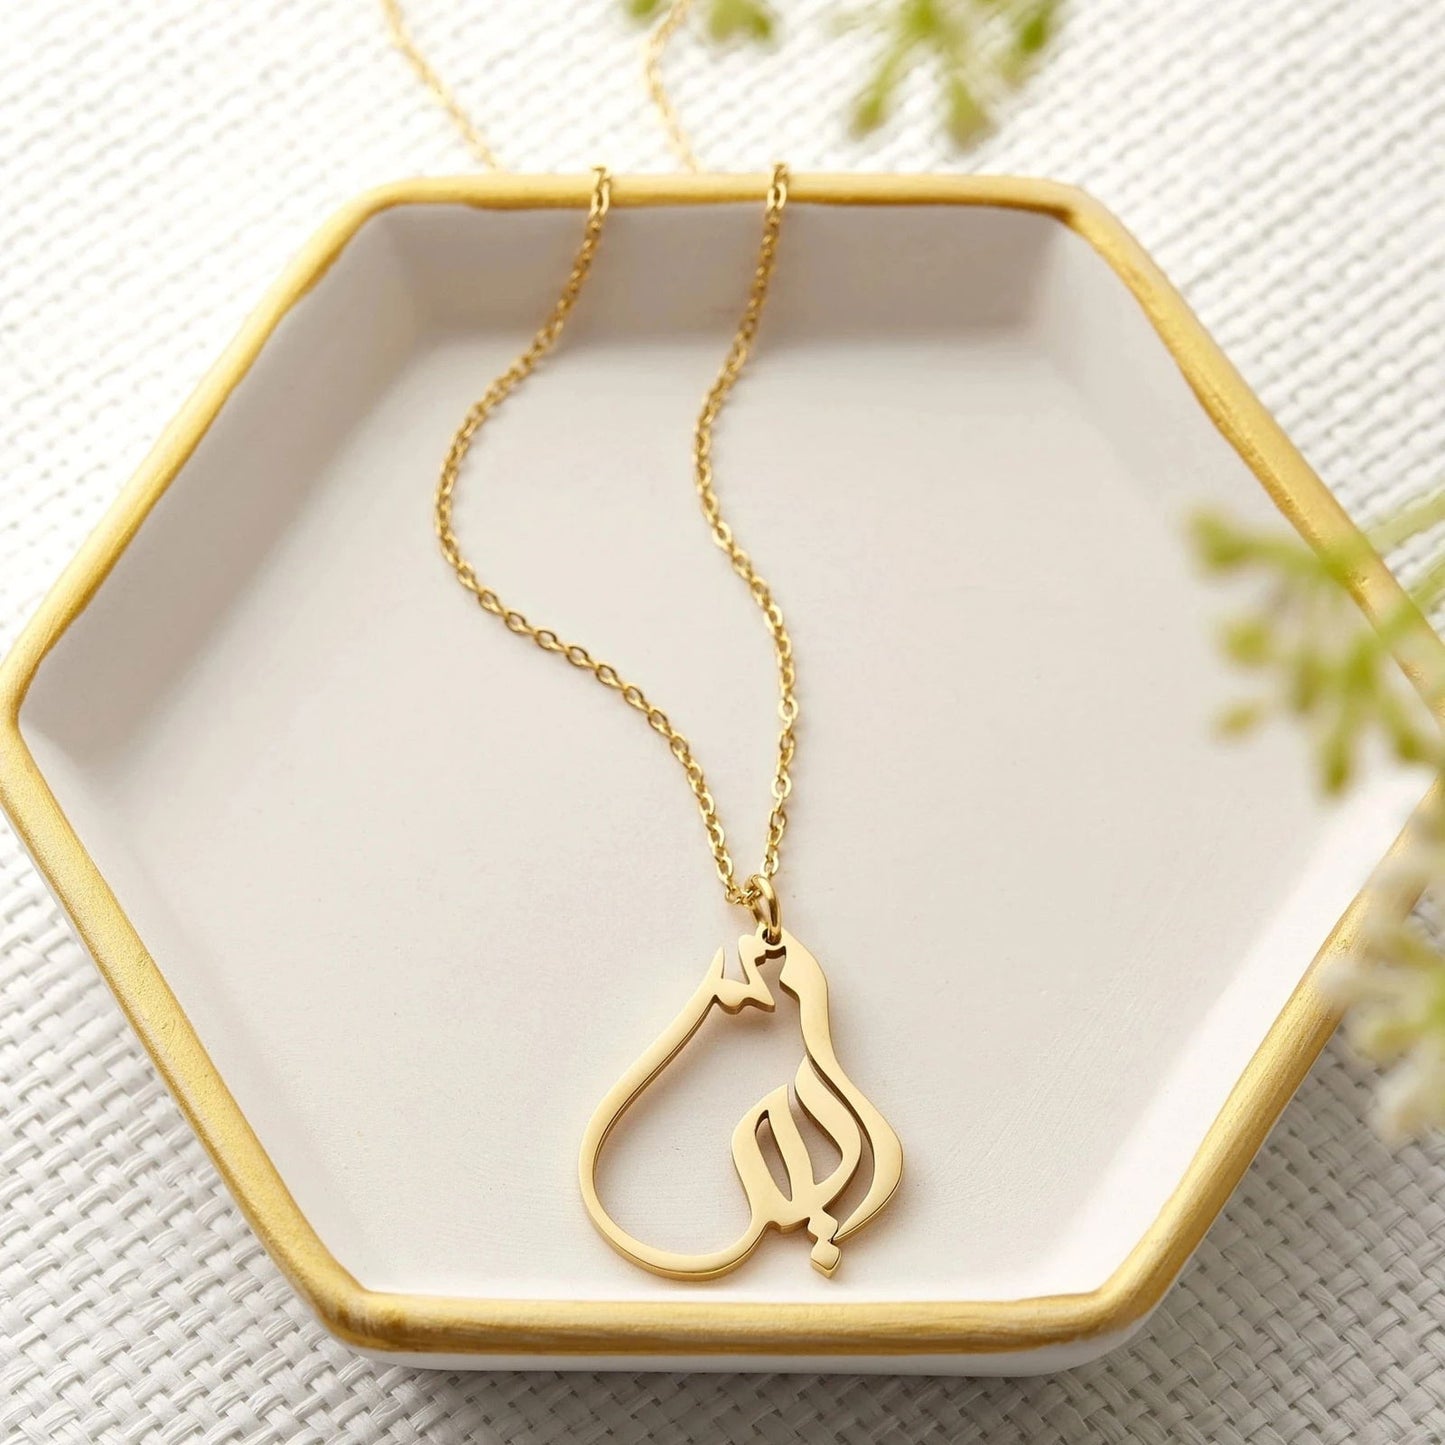 Ready Made Arabic Name Necklace - Arabic Name Jewellery